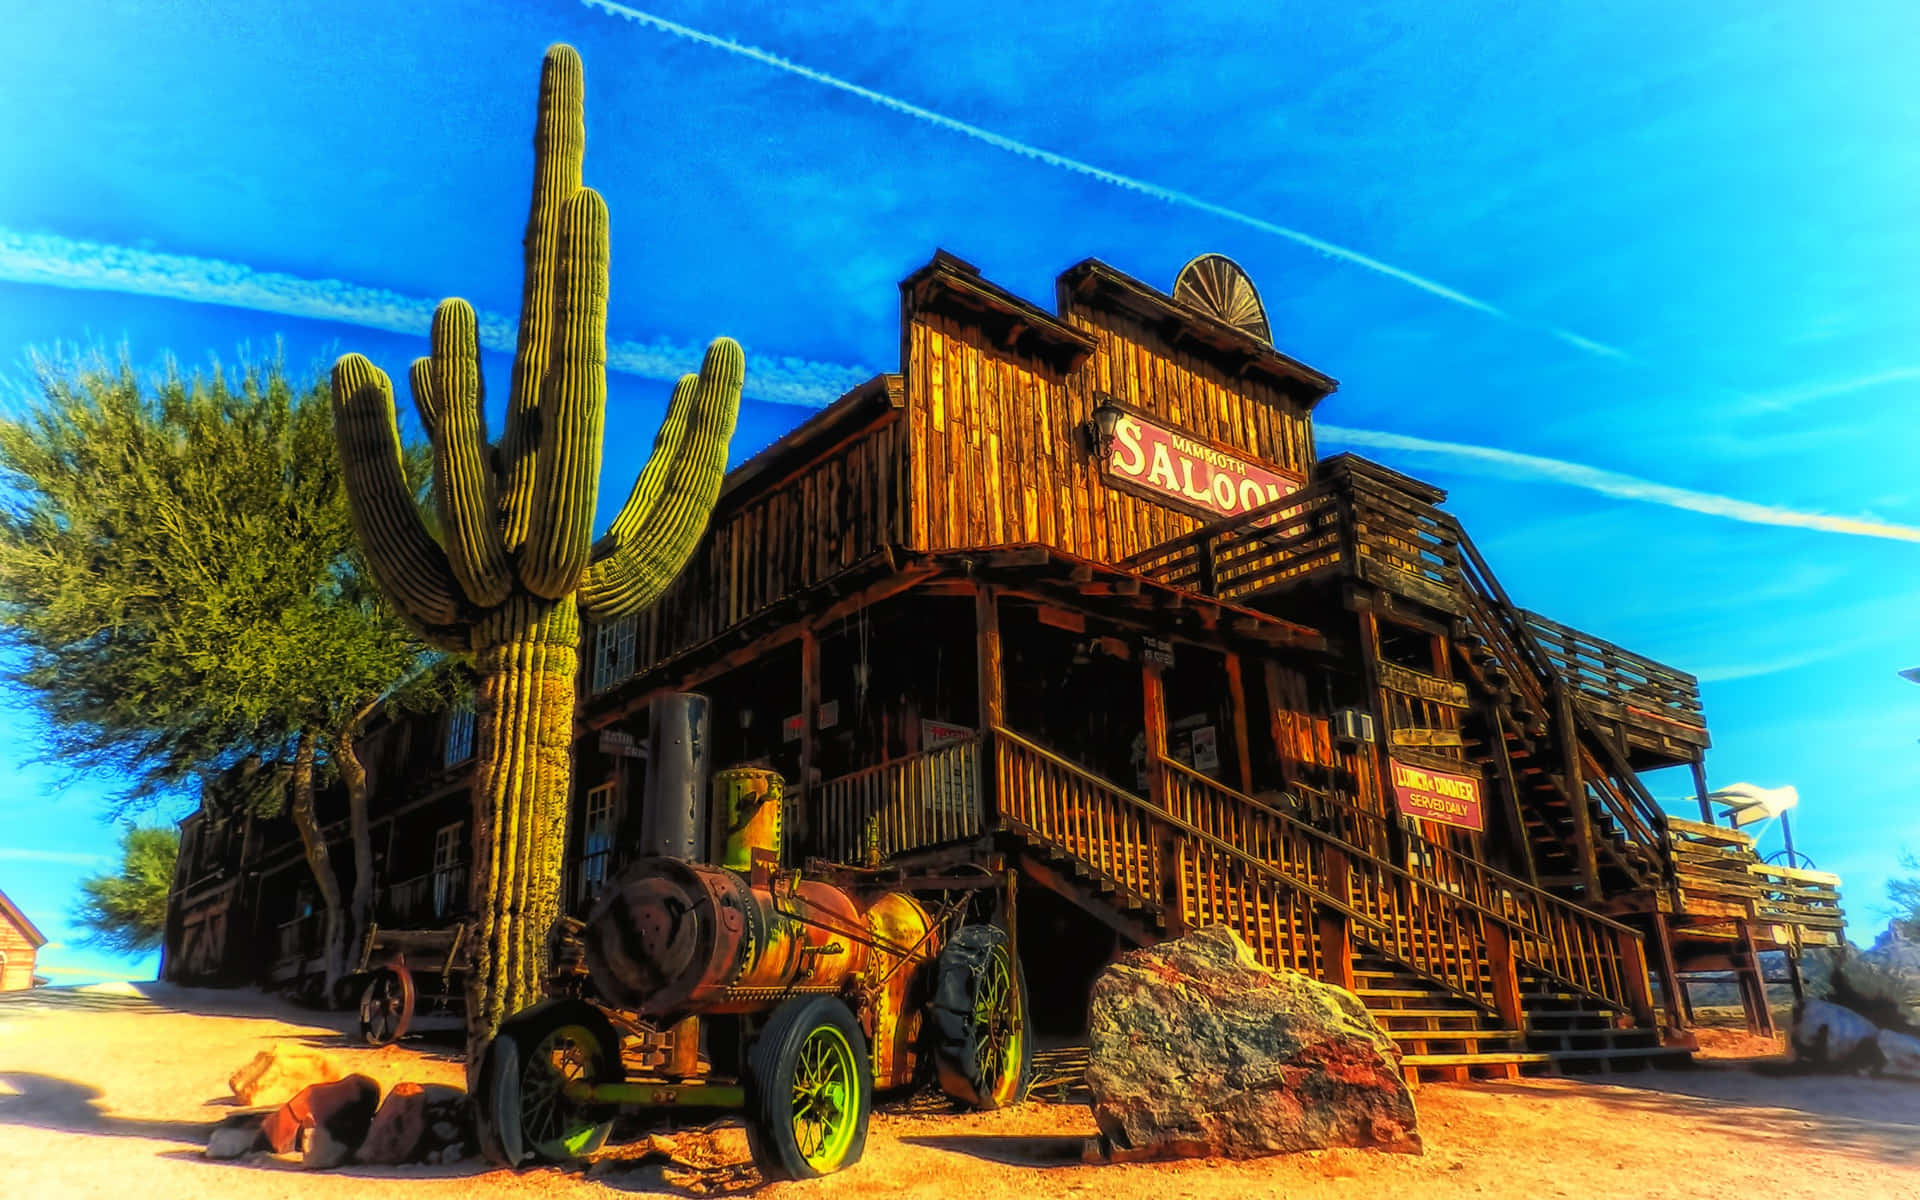 "Chasing Adventure in the Wild West" Wallpaper